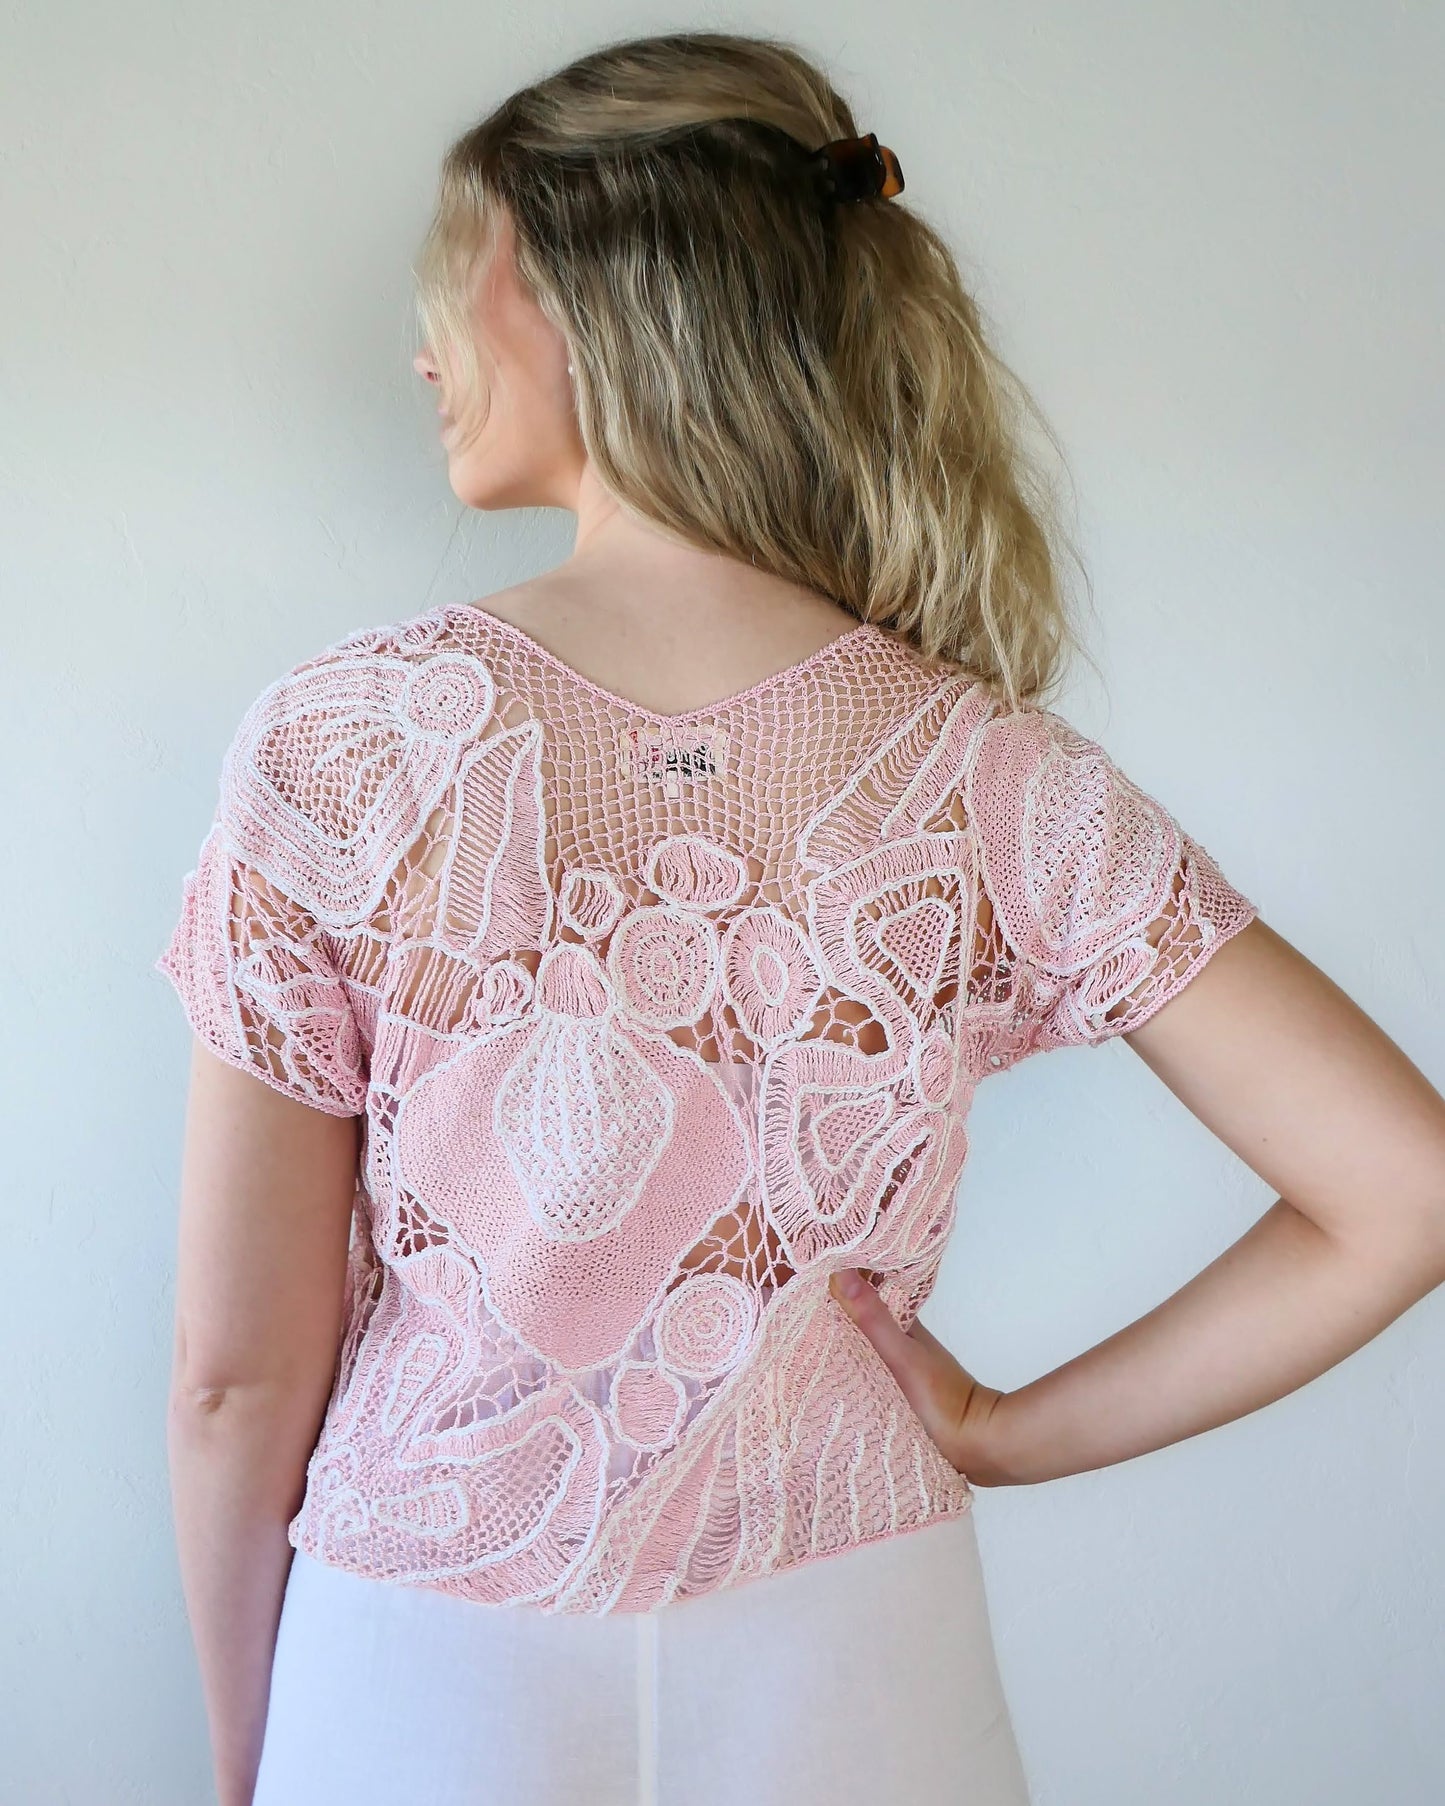 Back of view of girl wearing a crochet top with abstract flora design in colors of cotton candy pink and white. Lim's Vintage original crochet top from the 1980s.